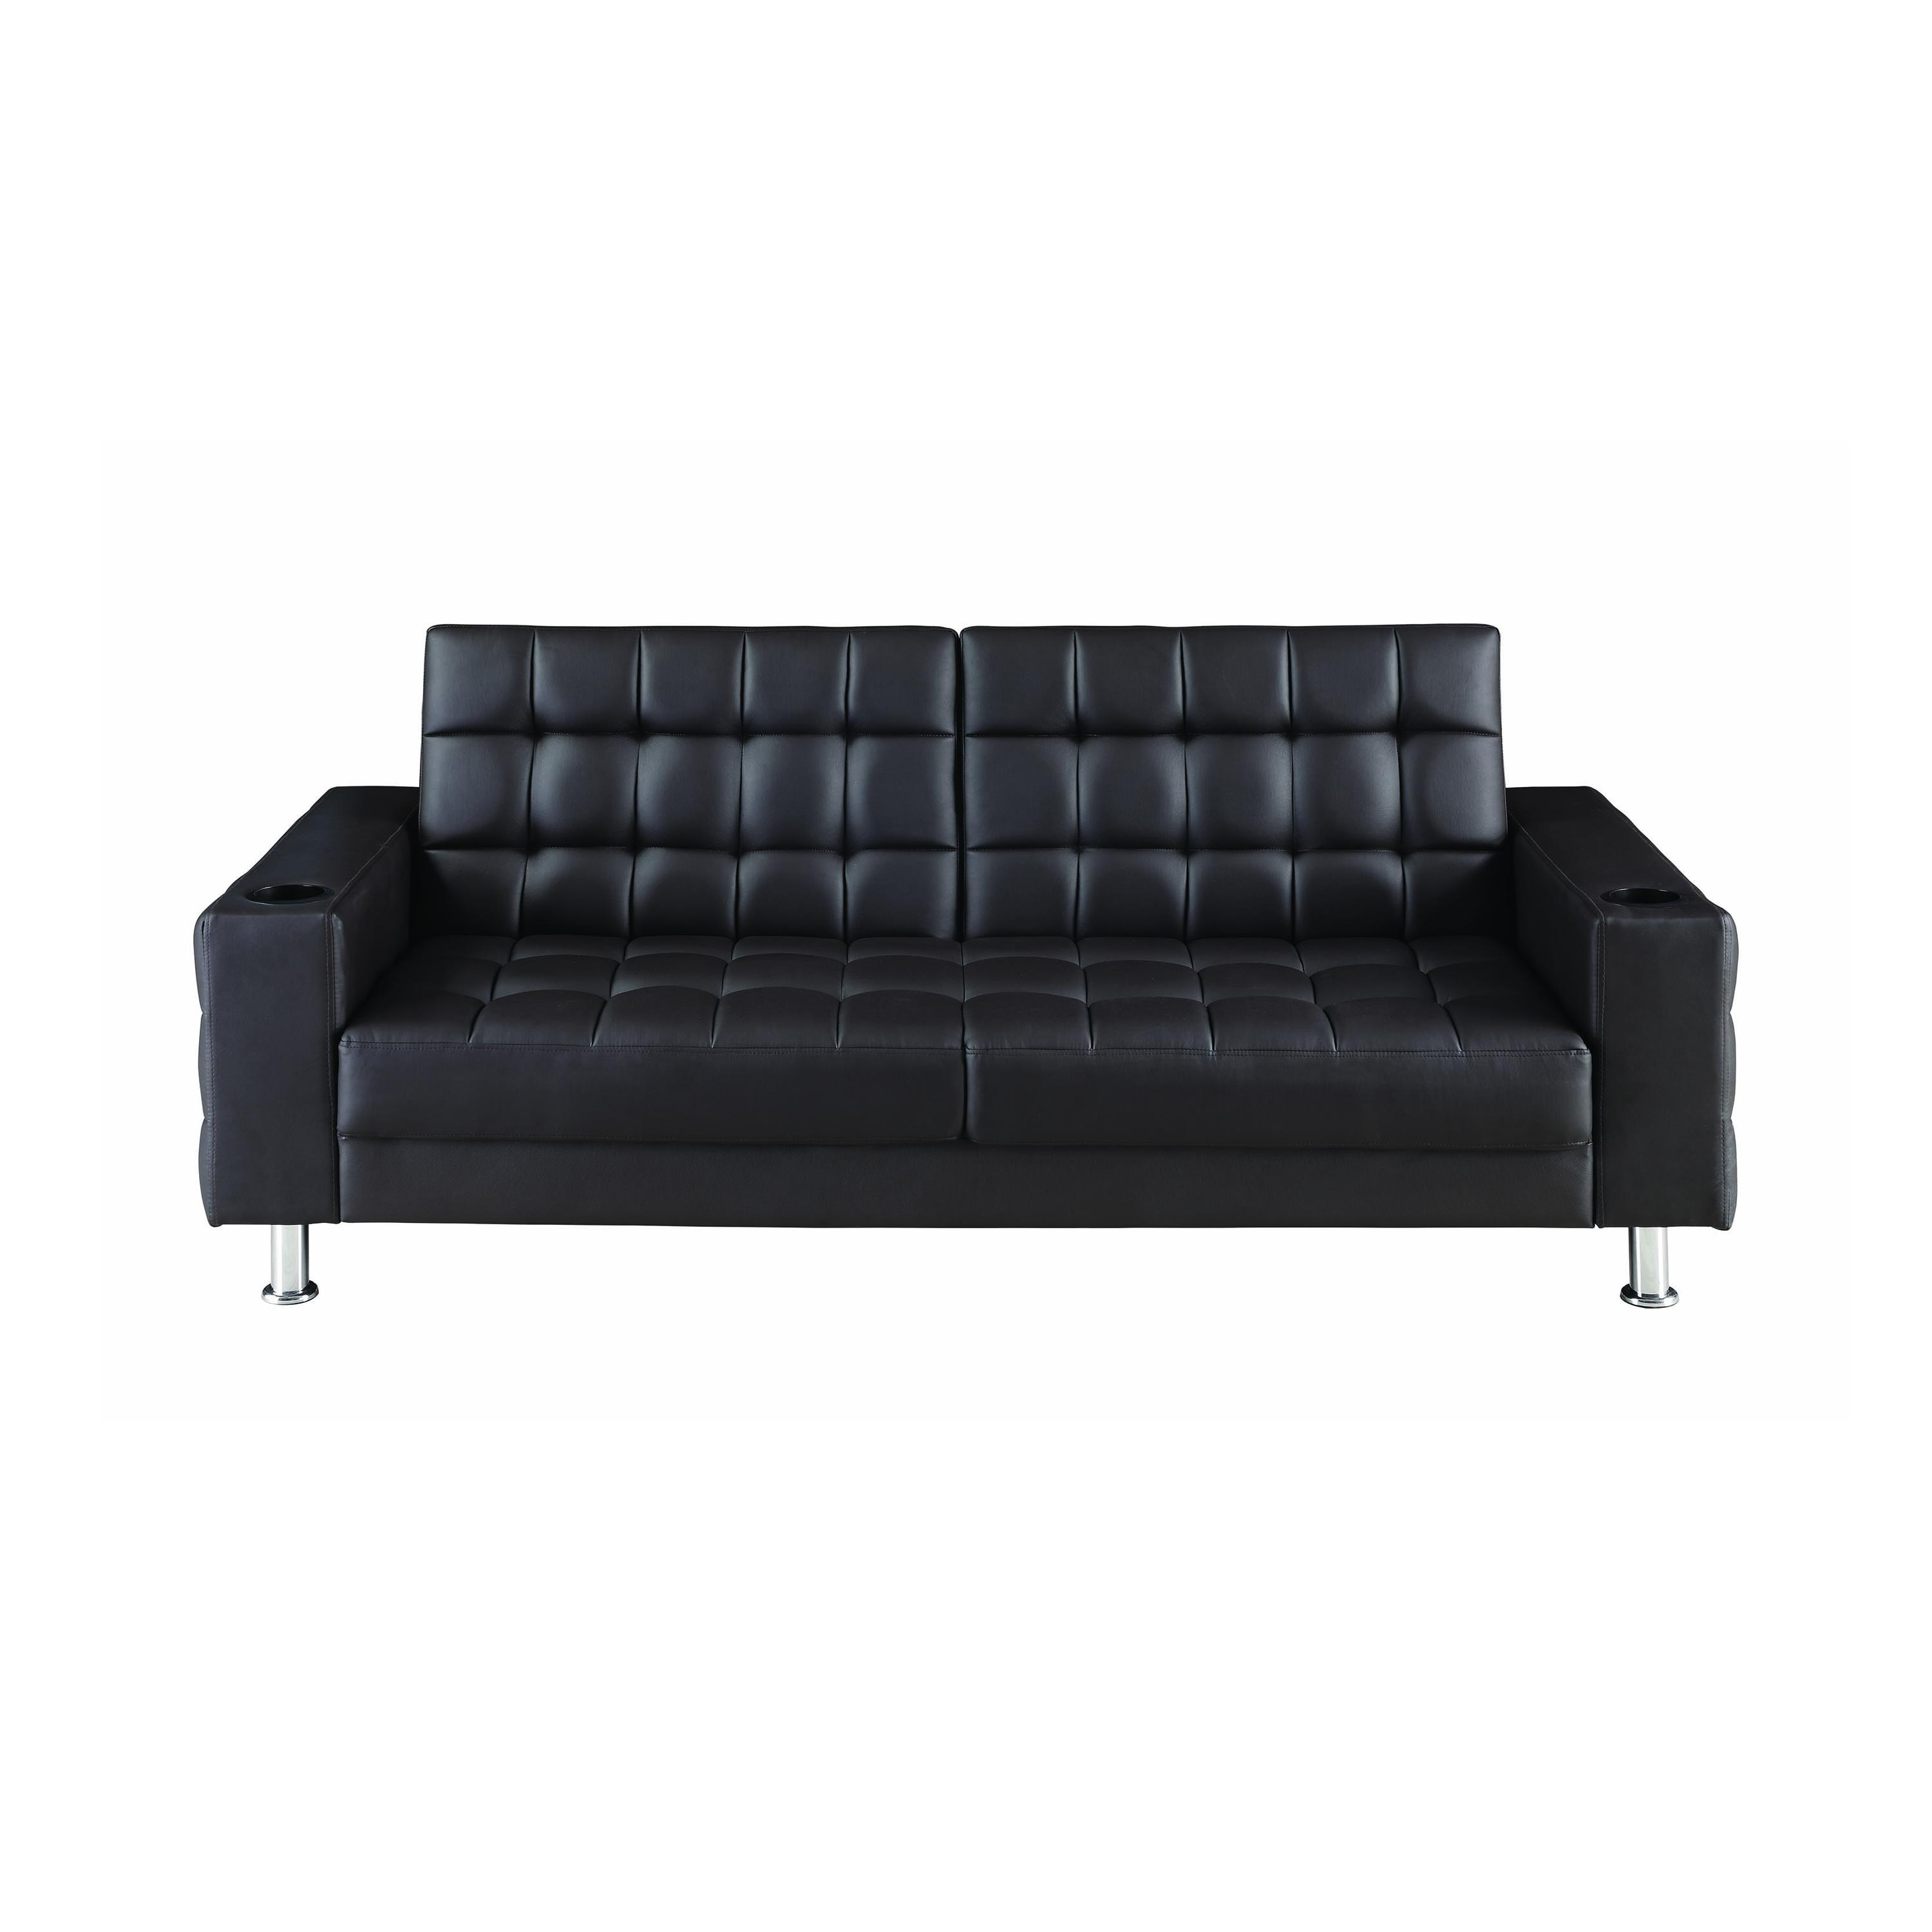 

    
Contemporary Dark Brown Leatherette Sofa Bed Coaster 300294 Pacheco
